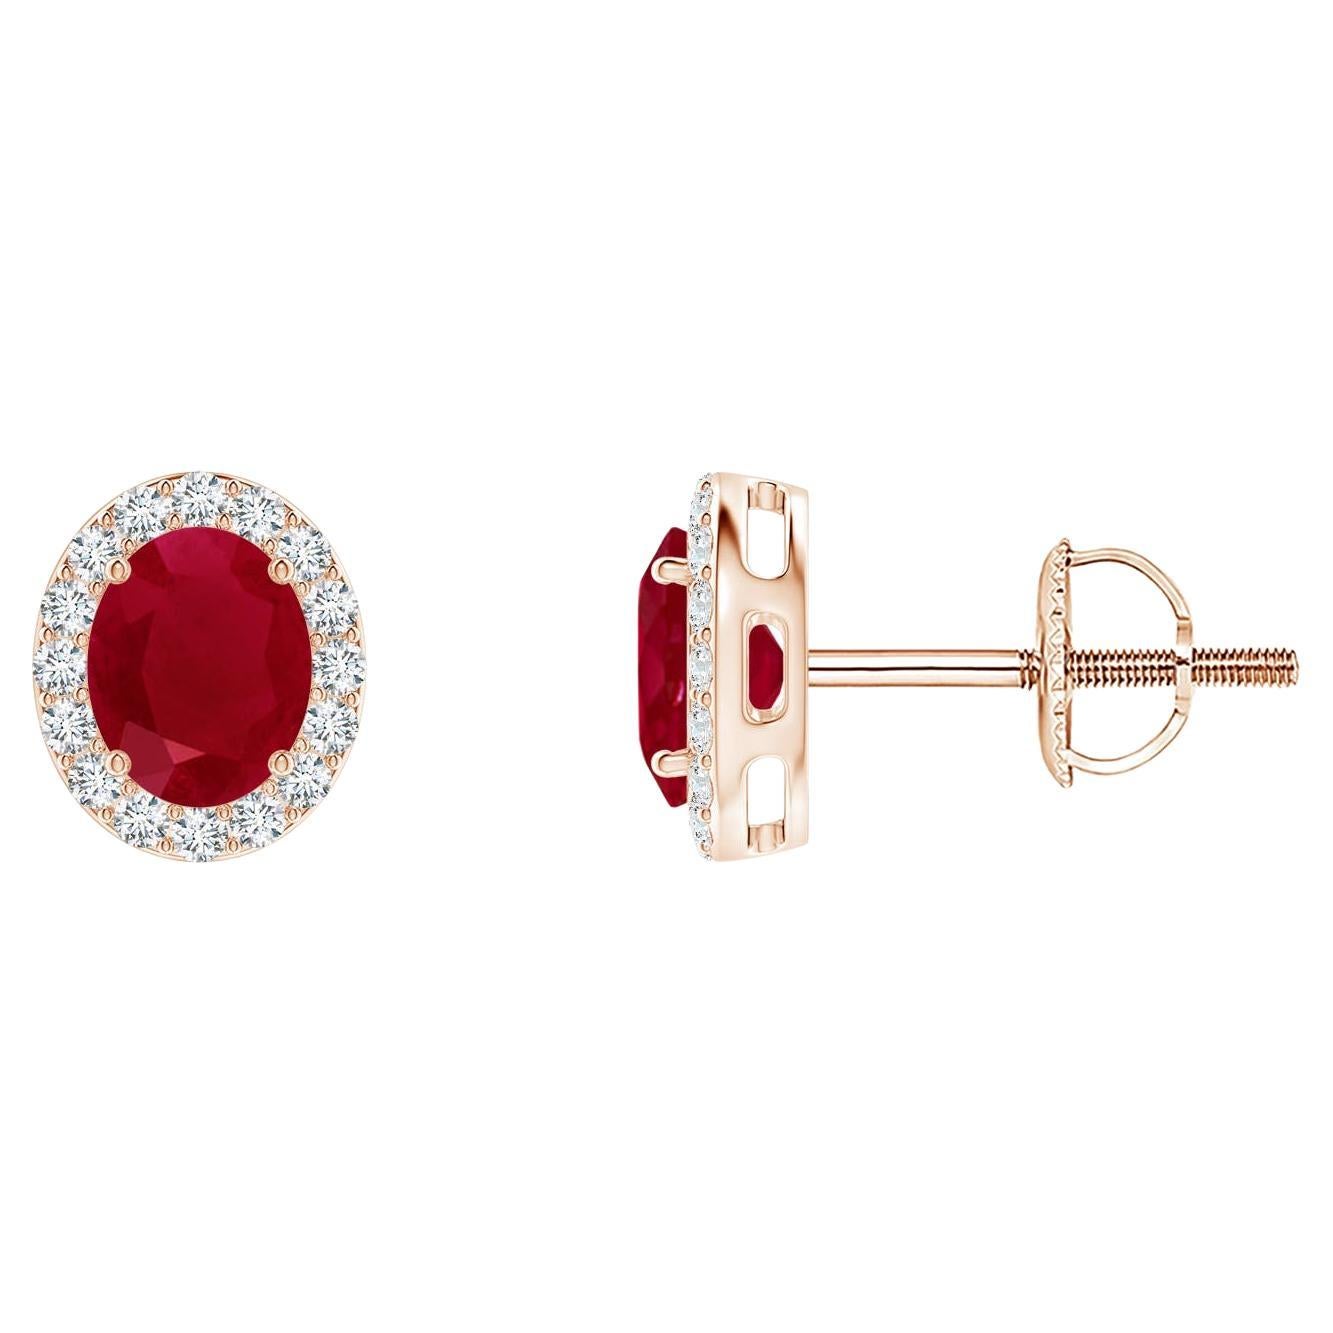 ANGARA Natural Oval 0.80ct Ruby Studs with Diamond Halo in 14K Rose Gold